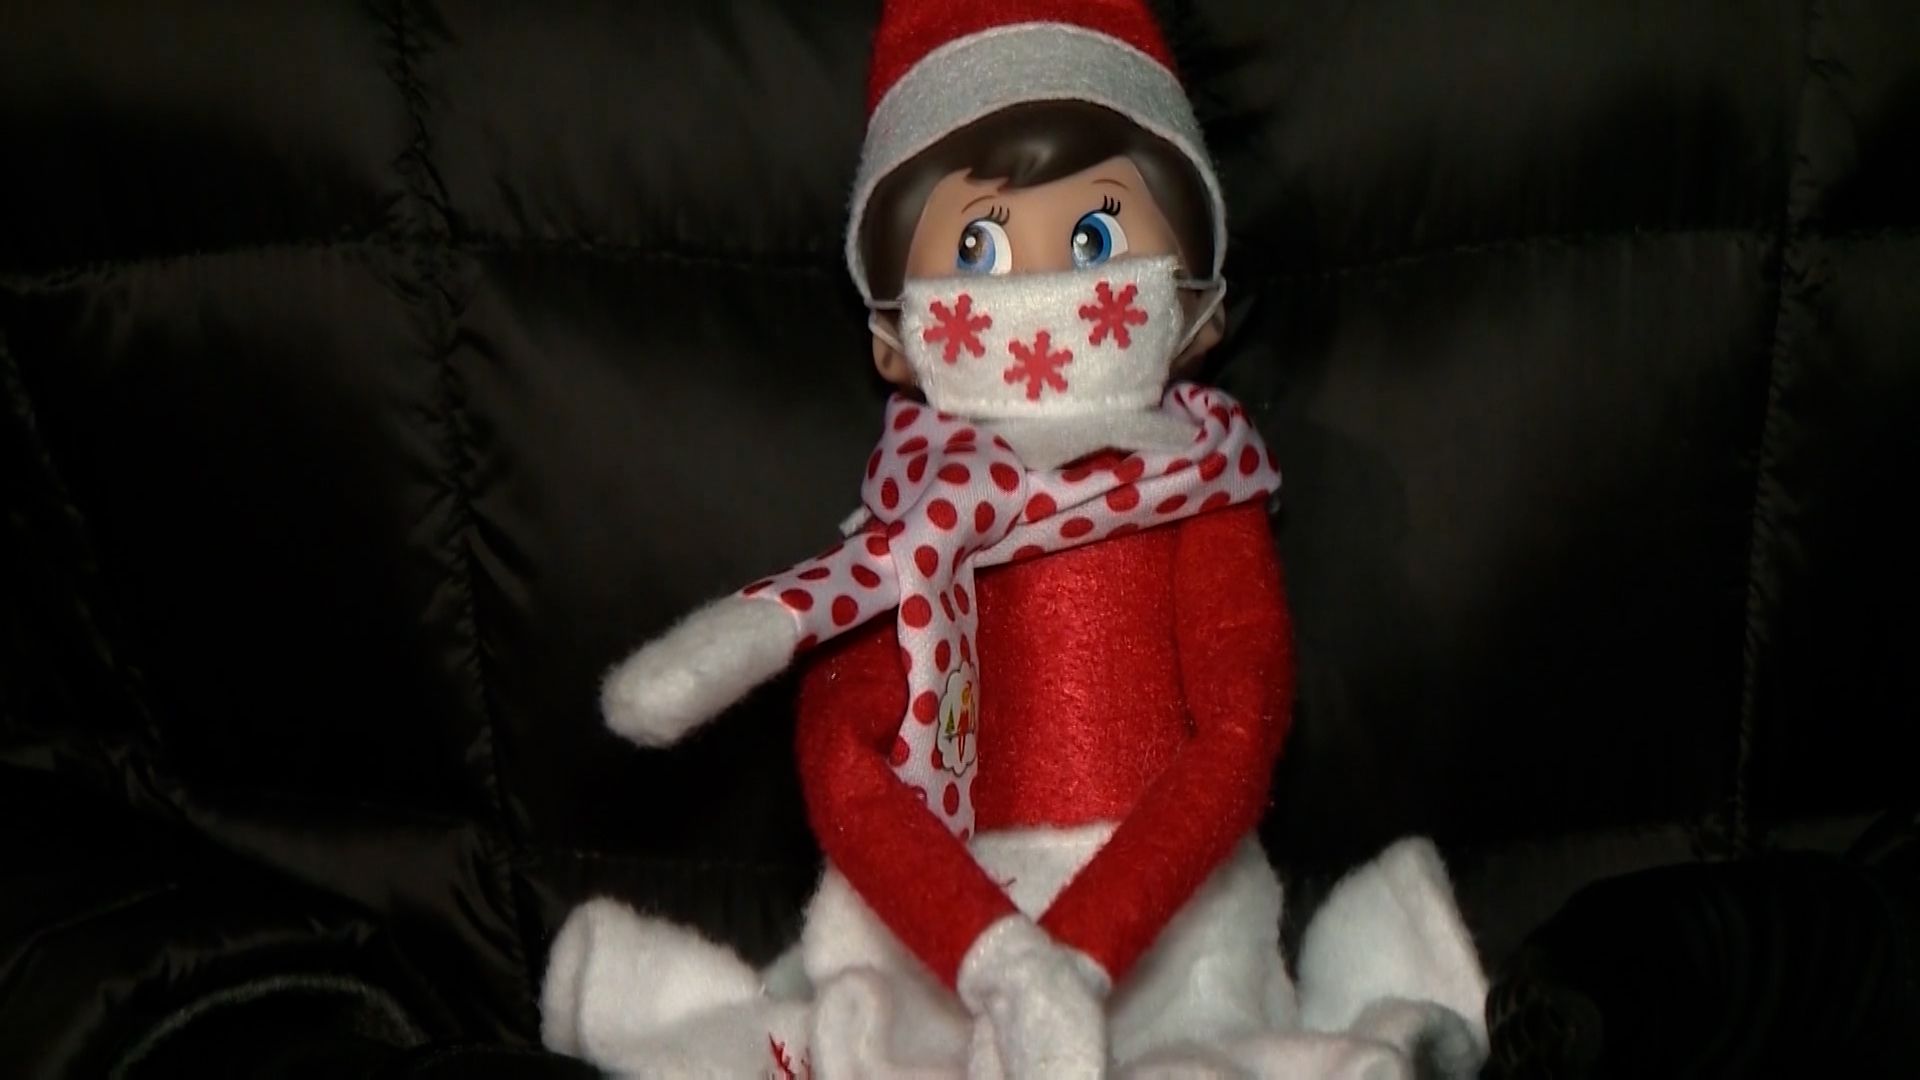 Inspired by loss, woman puts a 2020 twist on Elf on the Shelf